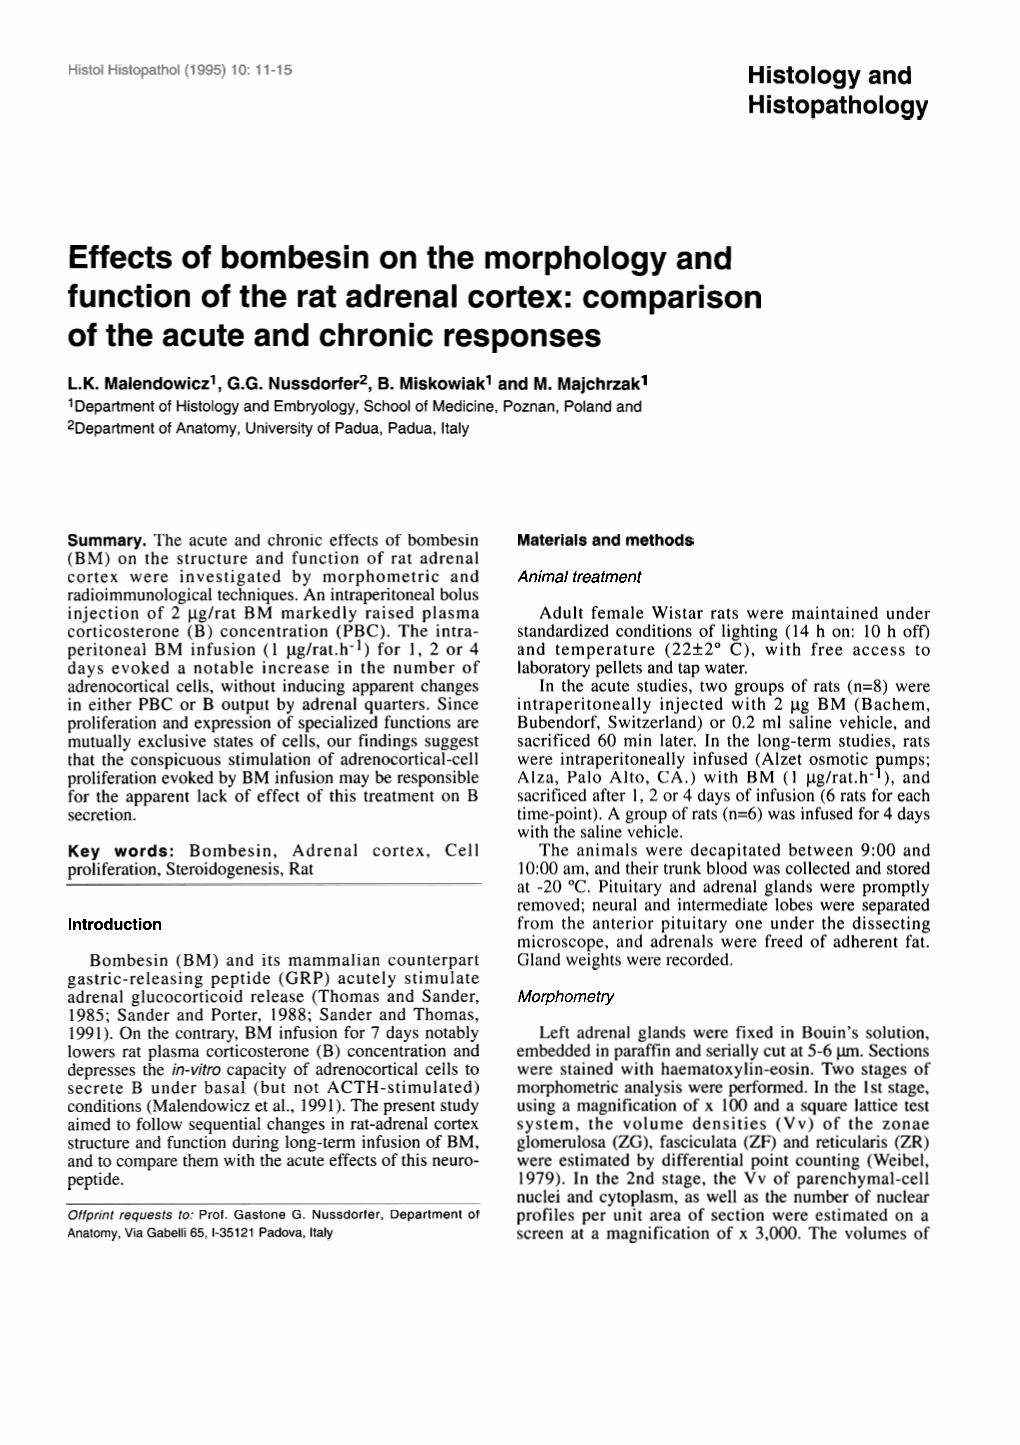 Effects of Bombesin on the Morphology and Function of the Rat Adrenal Cortex: Comparison of the Acute and Chronic Responses